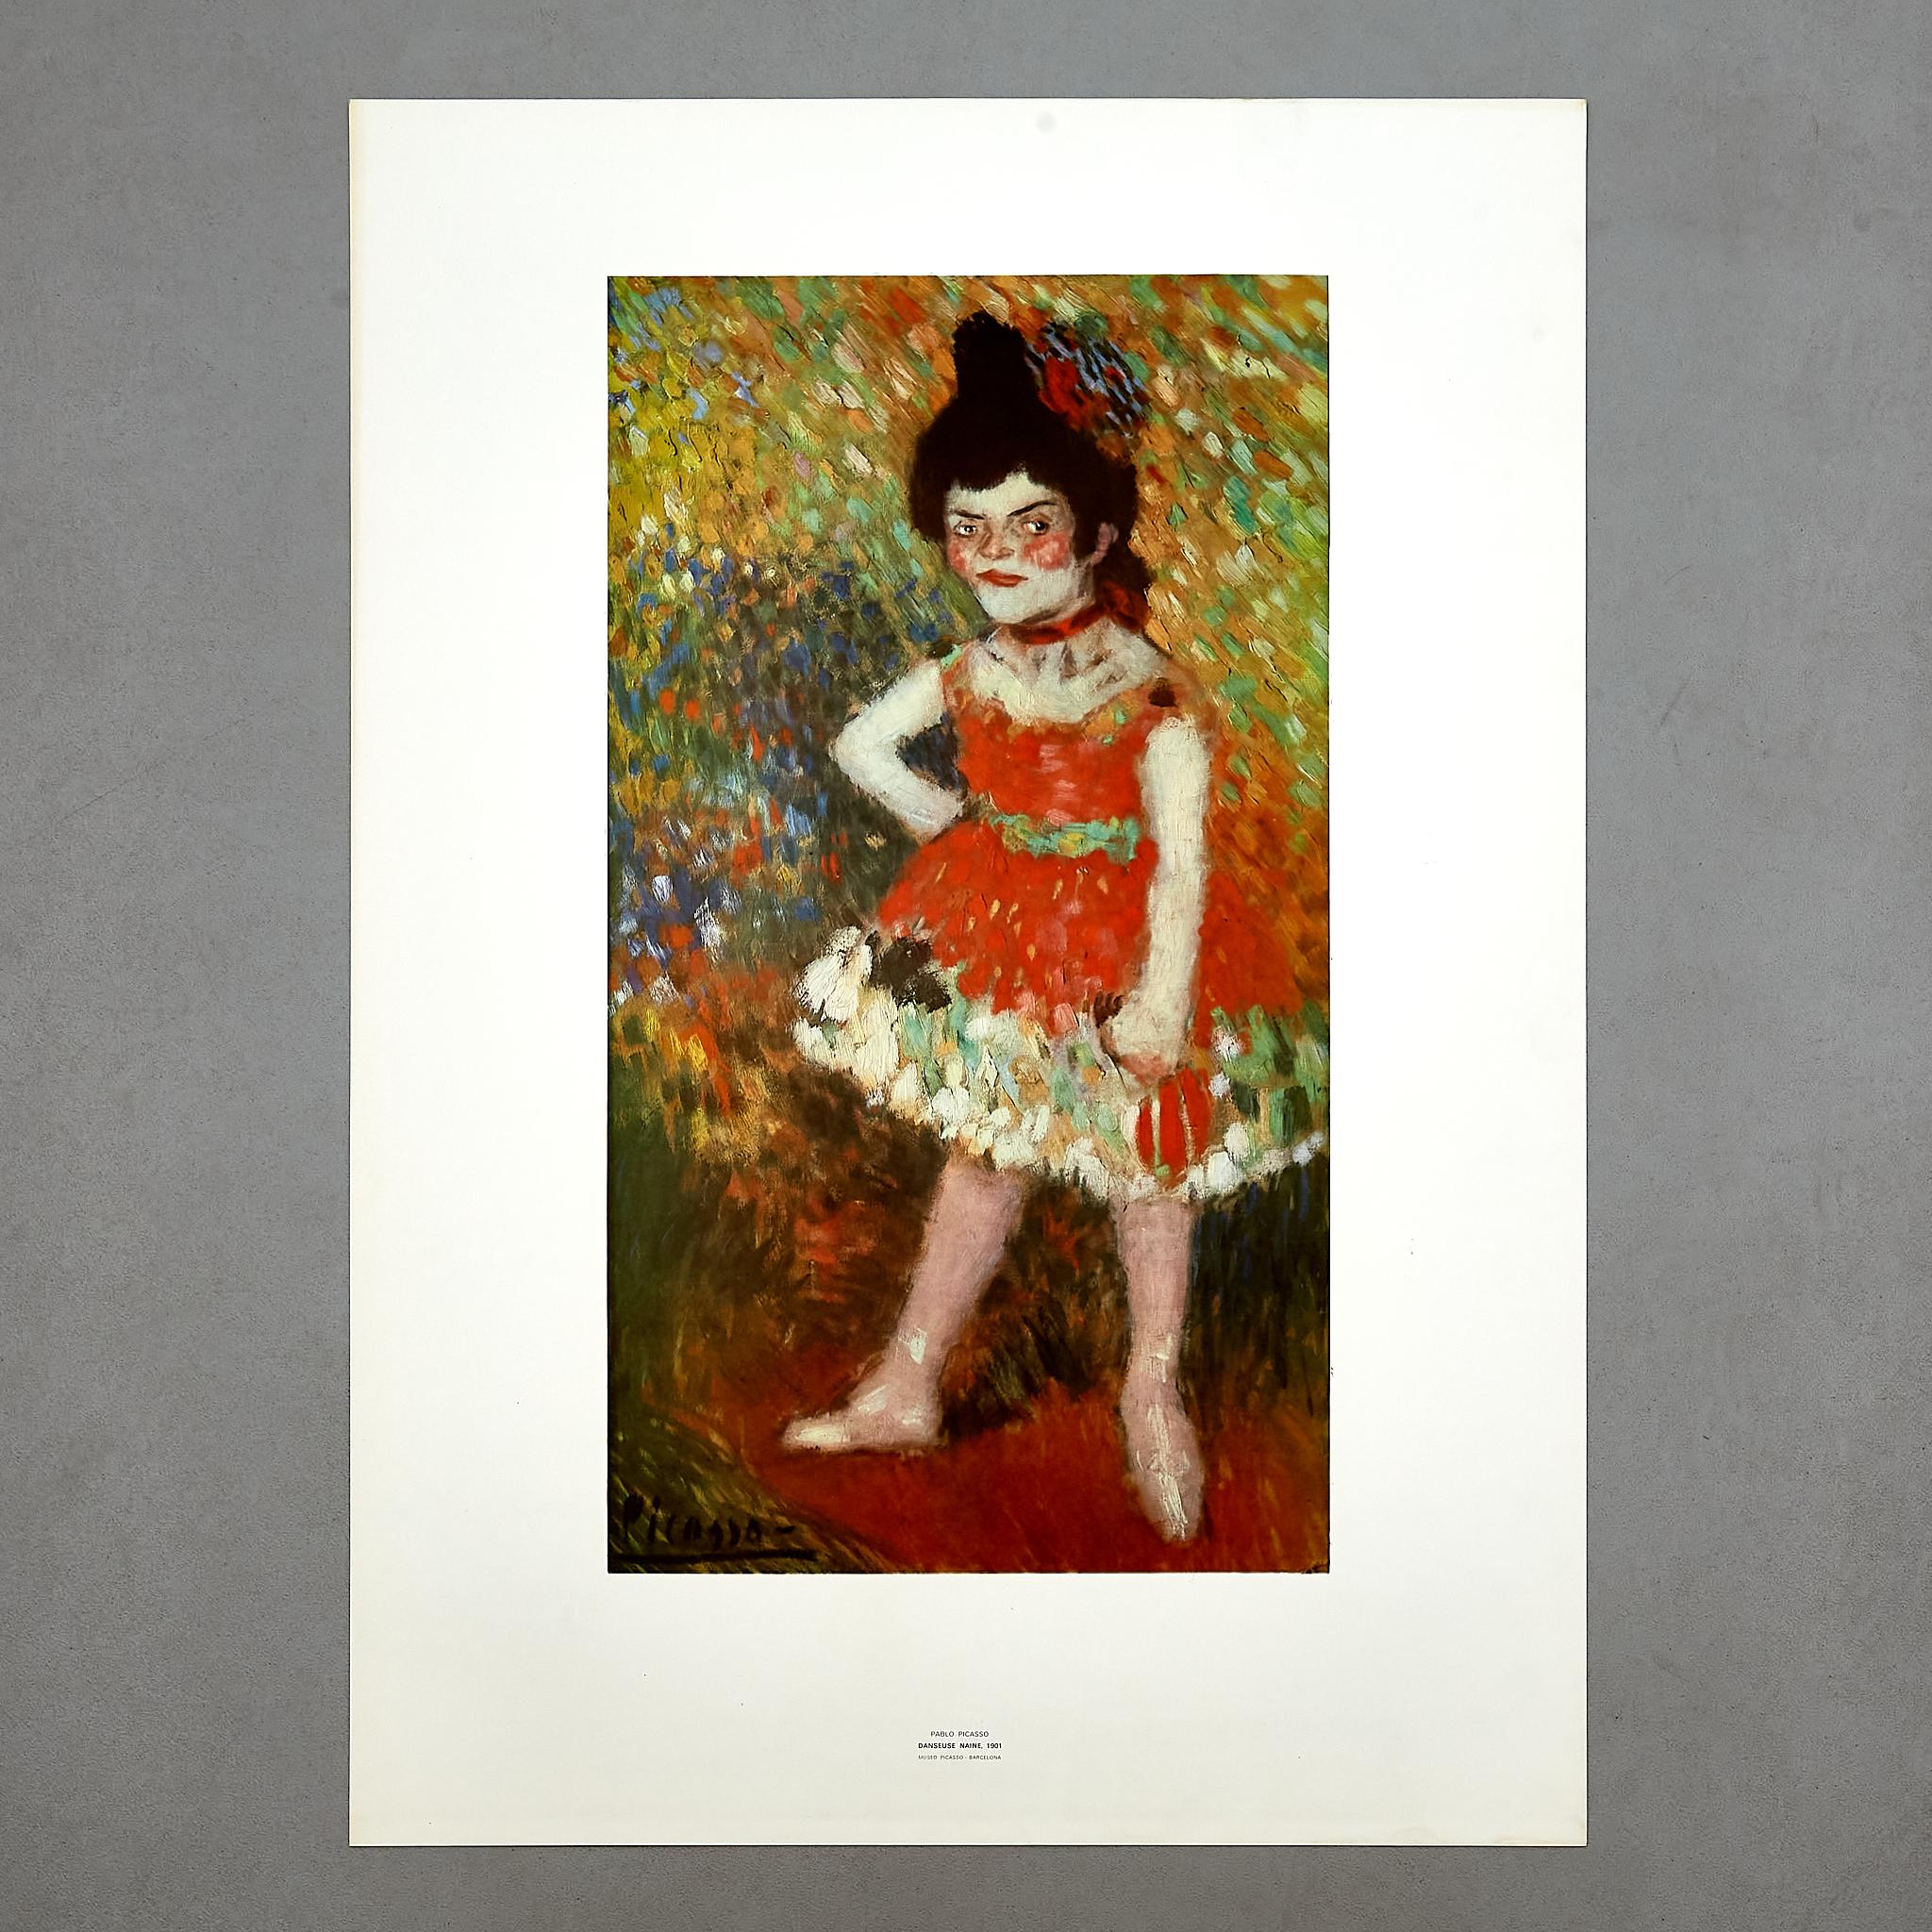 High Quality Print of Danseuse Naine 1901 by Pablo Picasso.

Manufactured in Spain, circa 1966.

In original condition with minor wear consistent of age and use, preserving a beautiful patina.

Materials: 
Paper 

Dimensions: 
D 0.1 cm x W 54.5 cm x